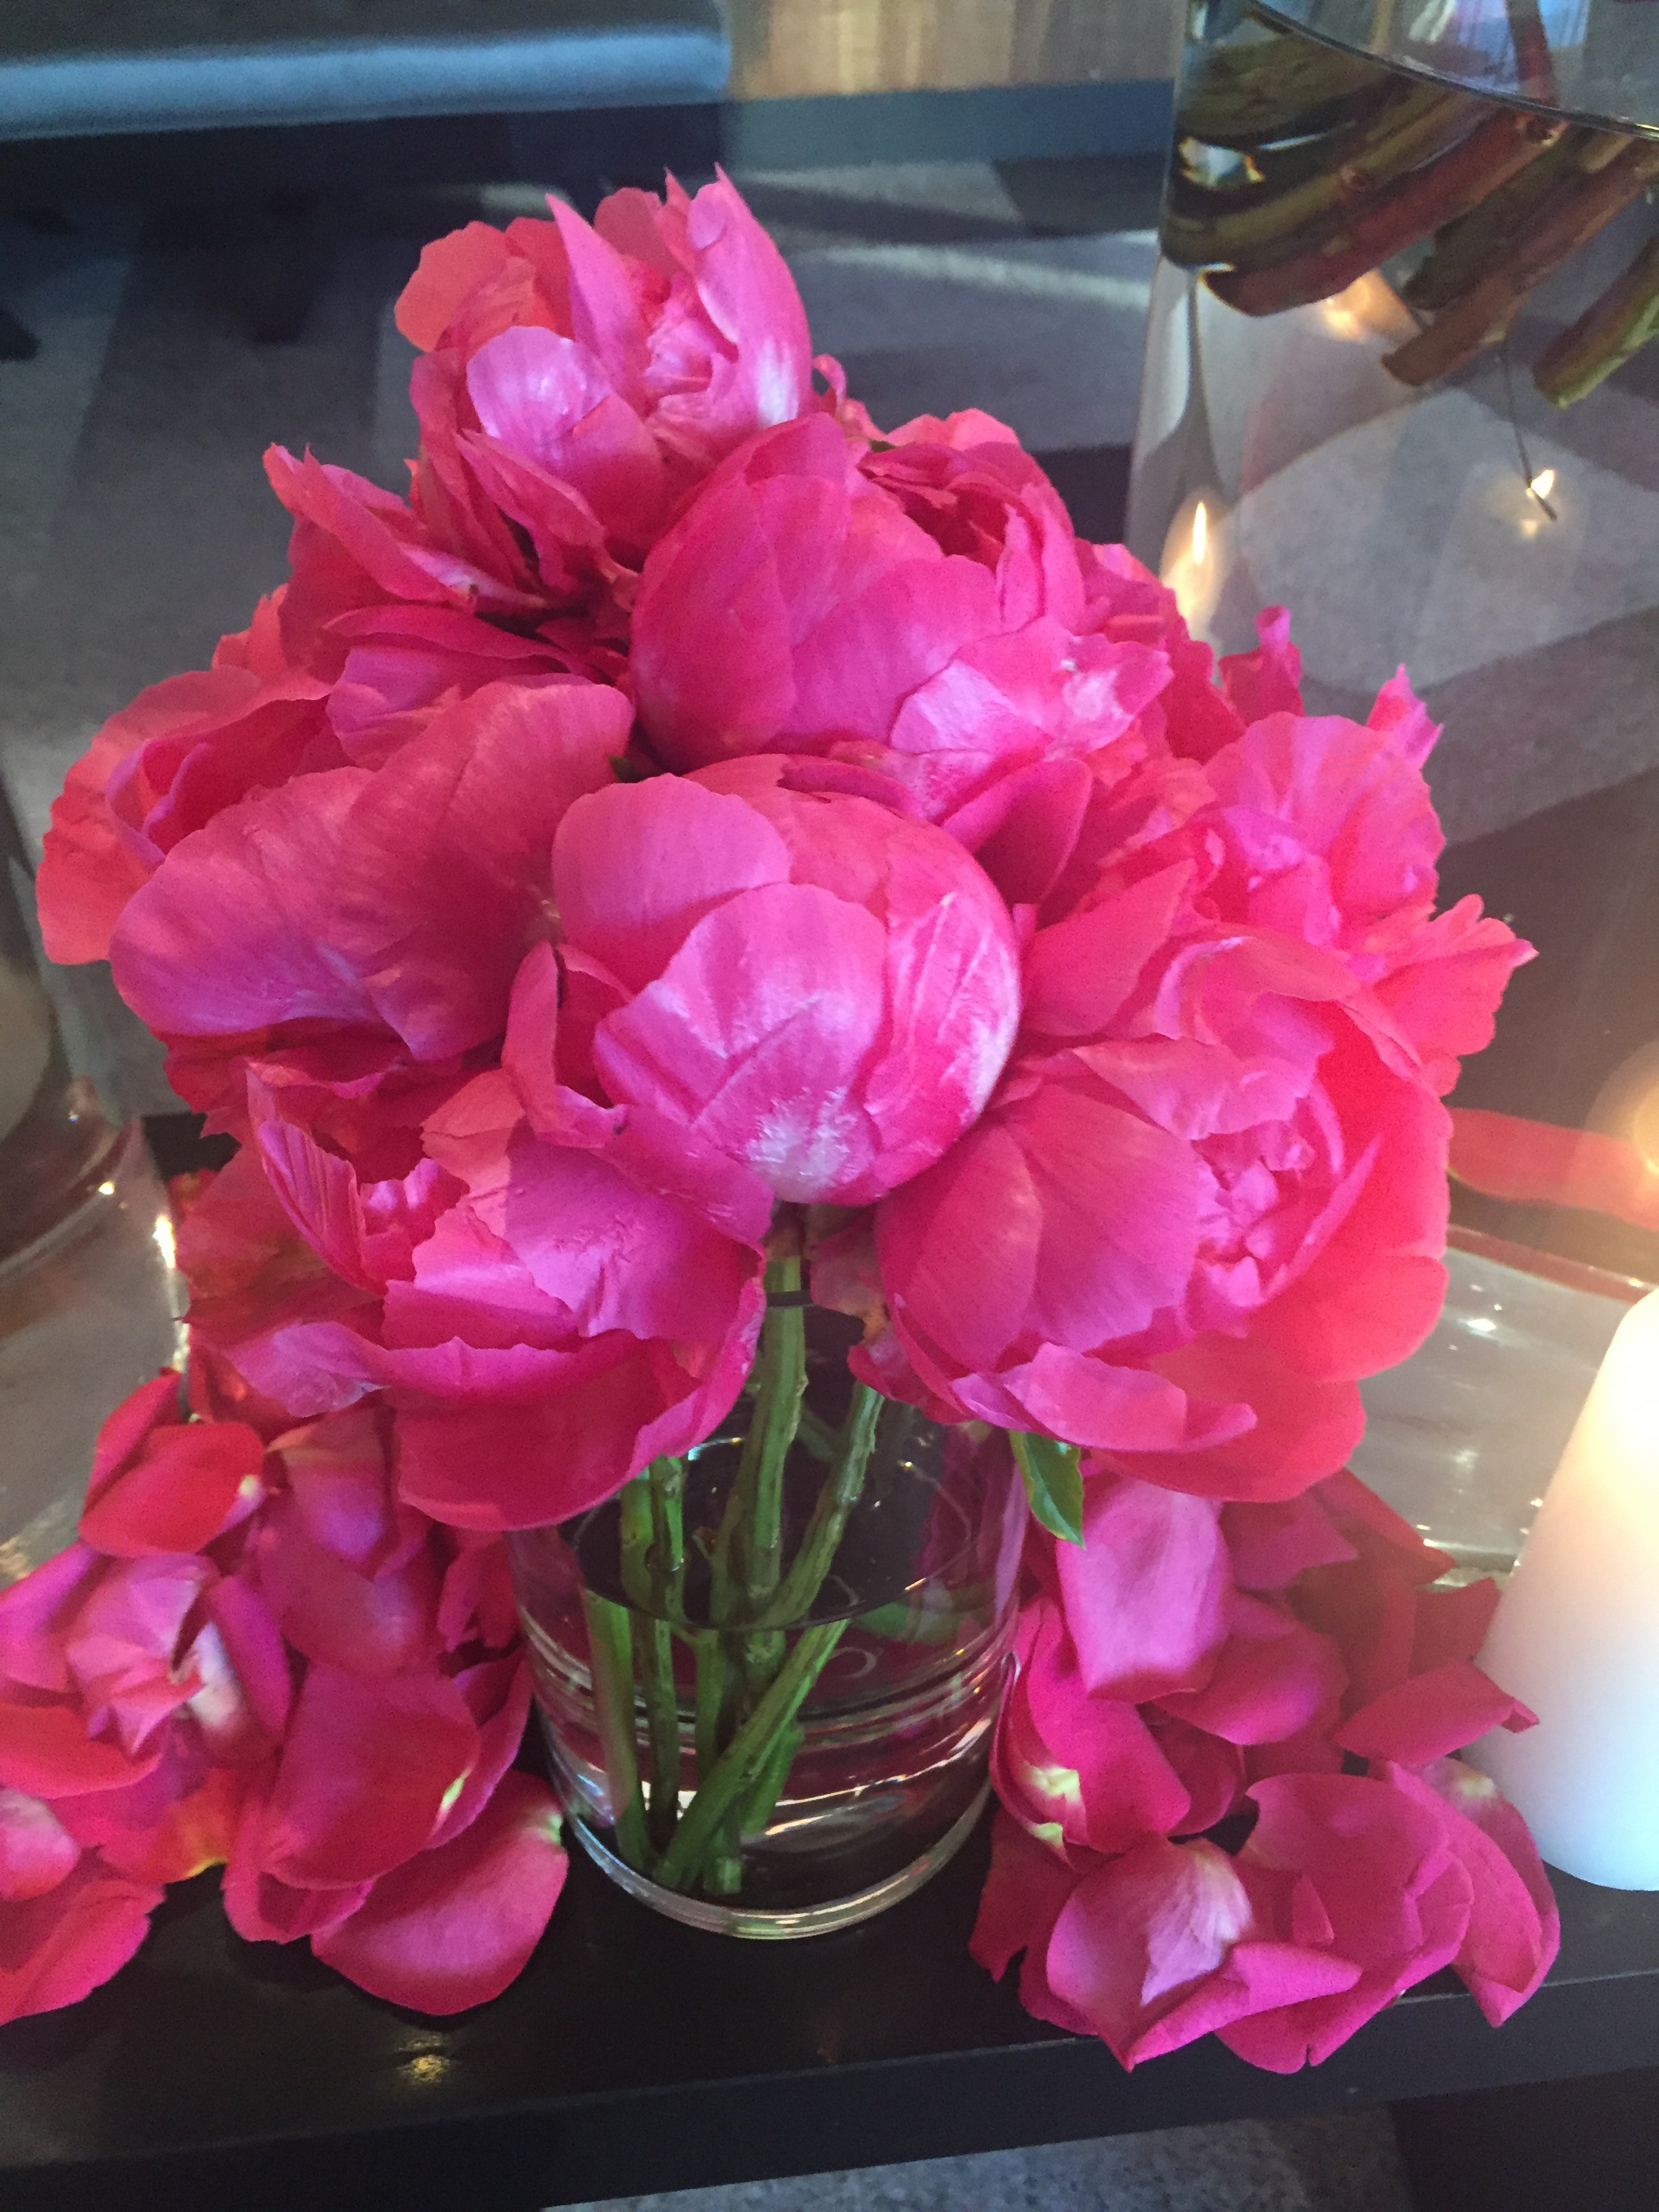 Never enough flowers. Especially peonies.